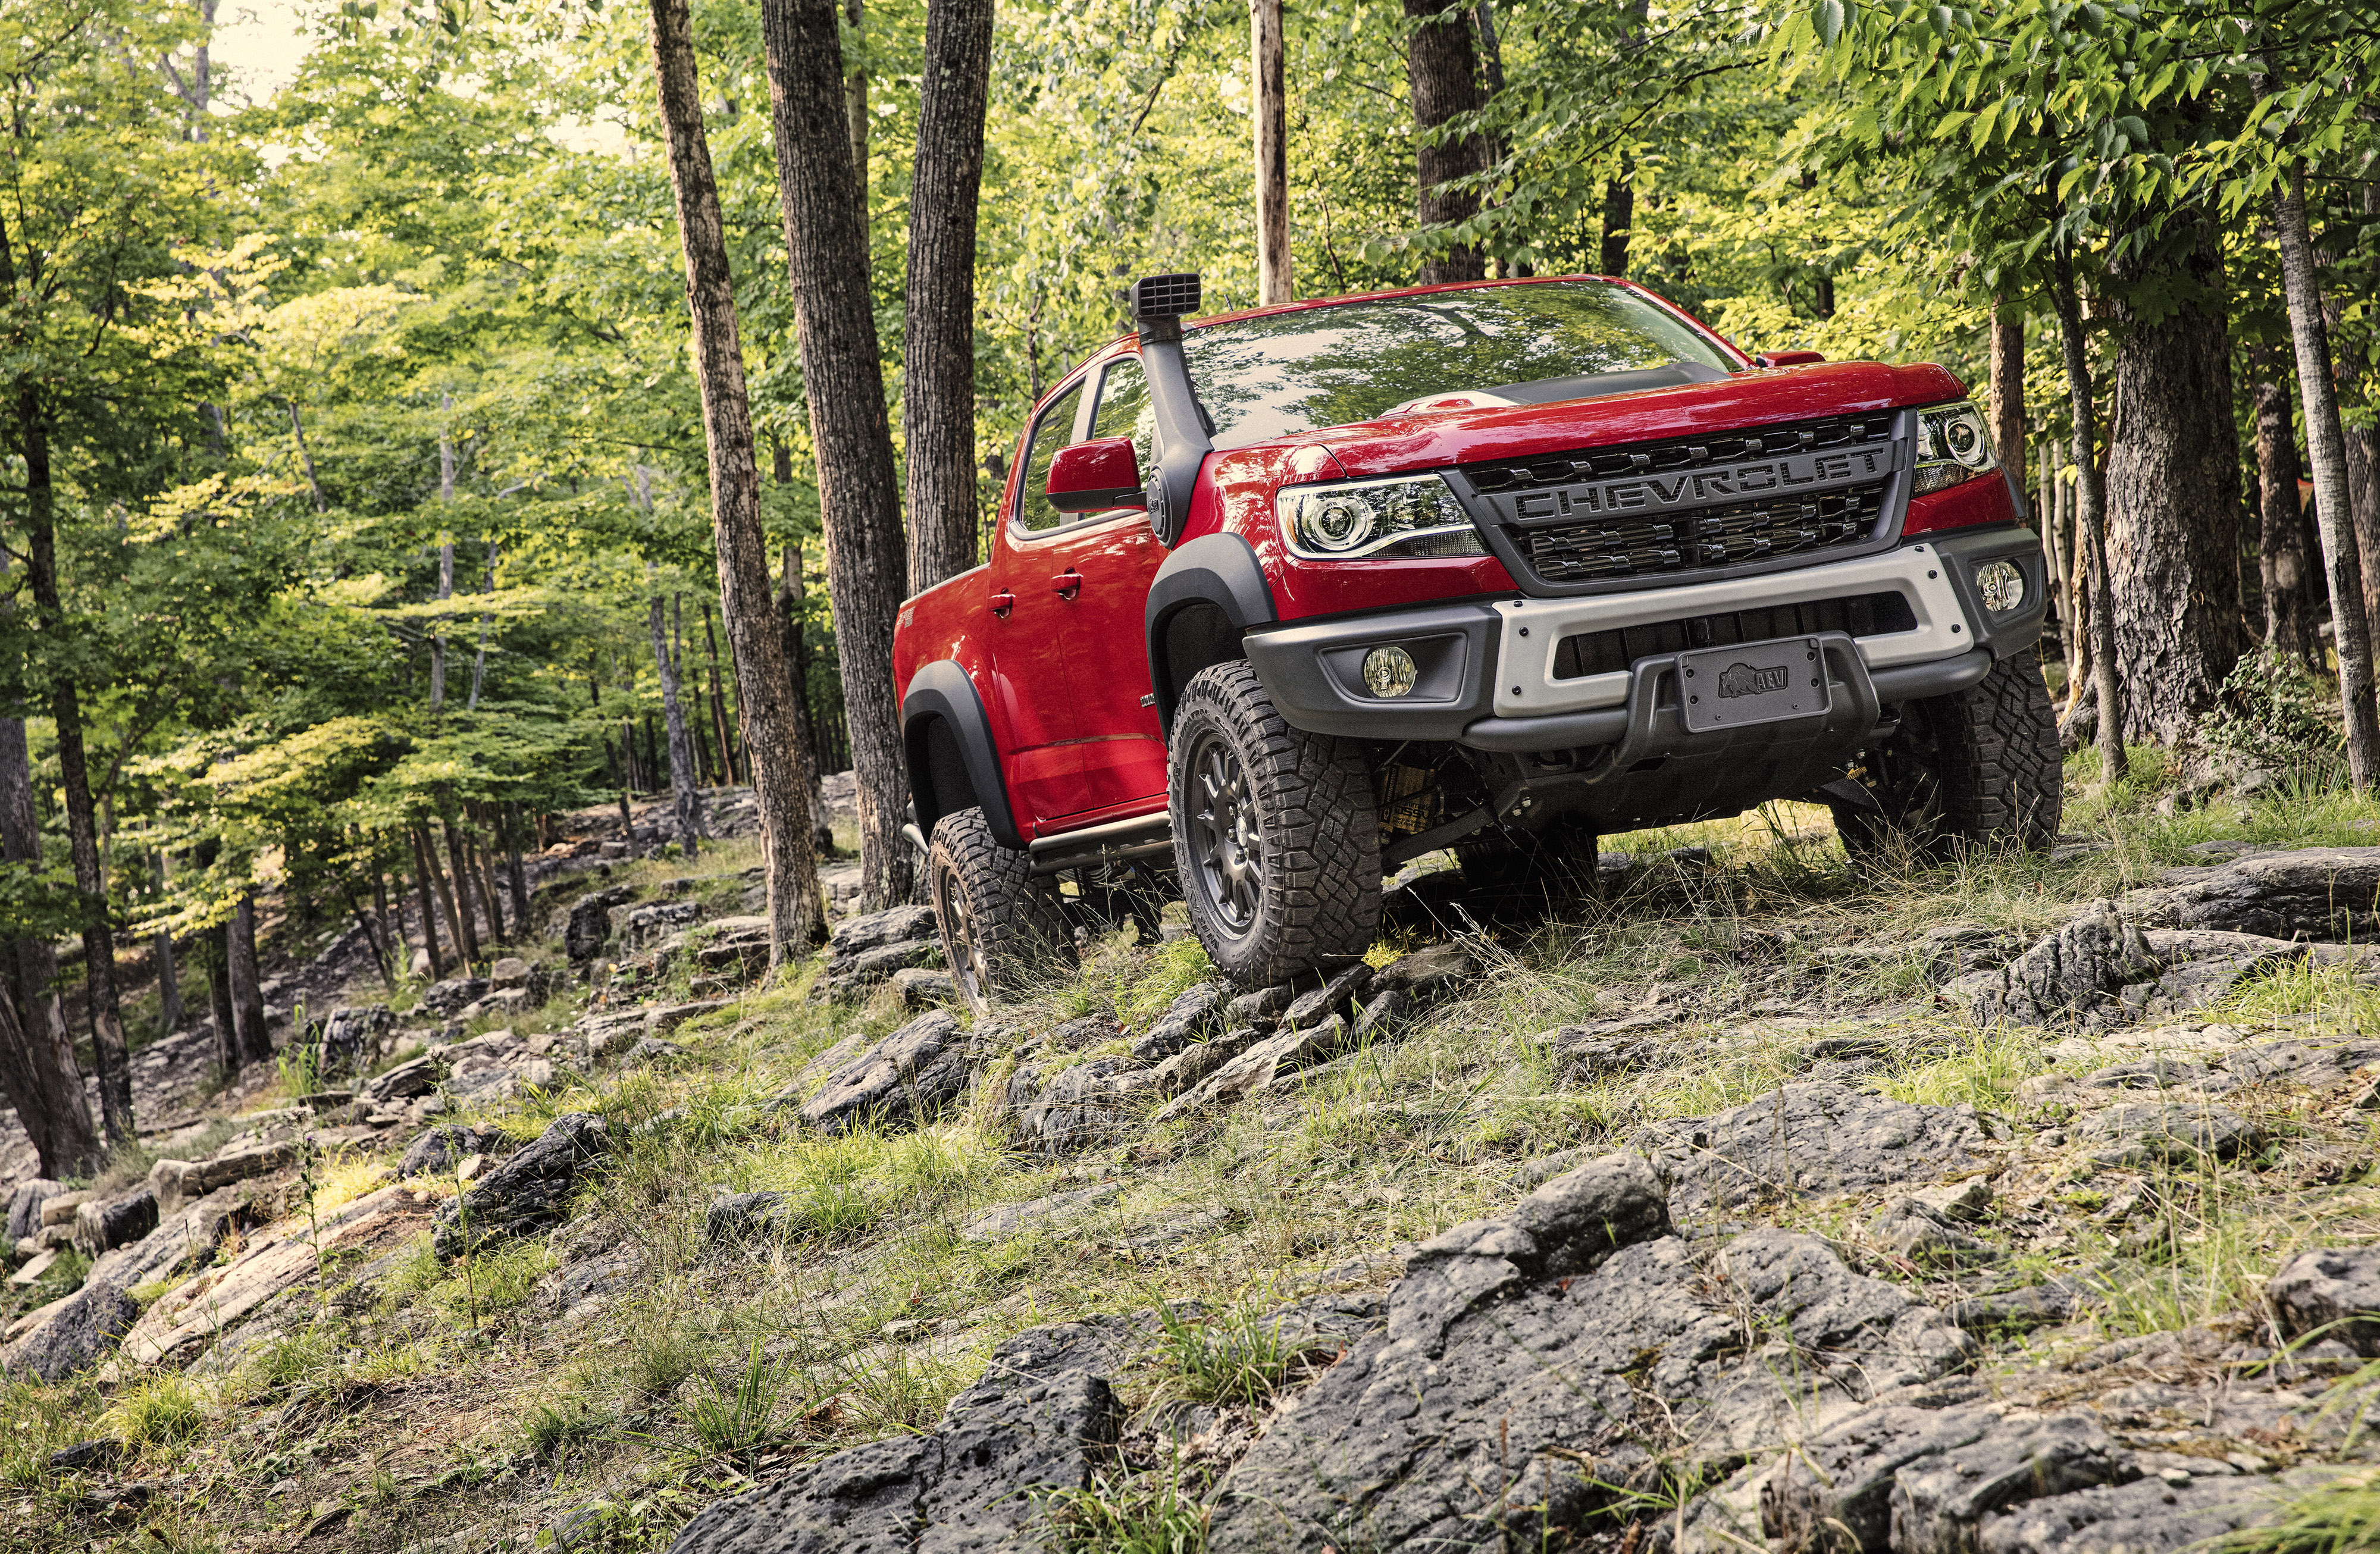 2020 Chevy Colorado | Chevrolet off-roading in the woods